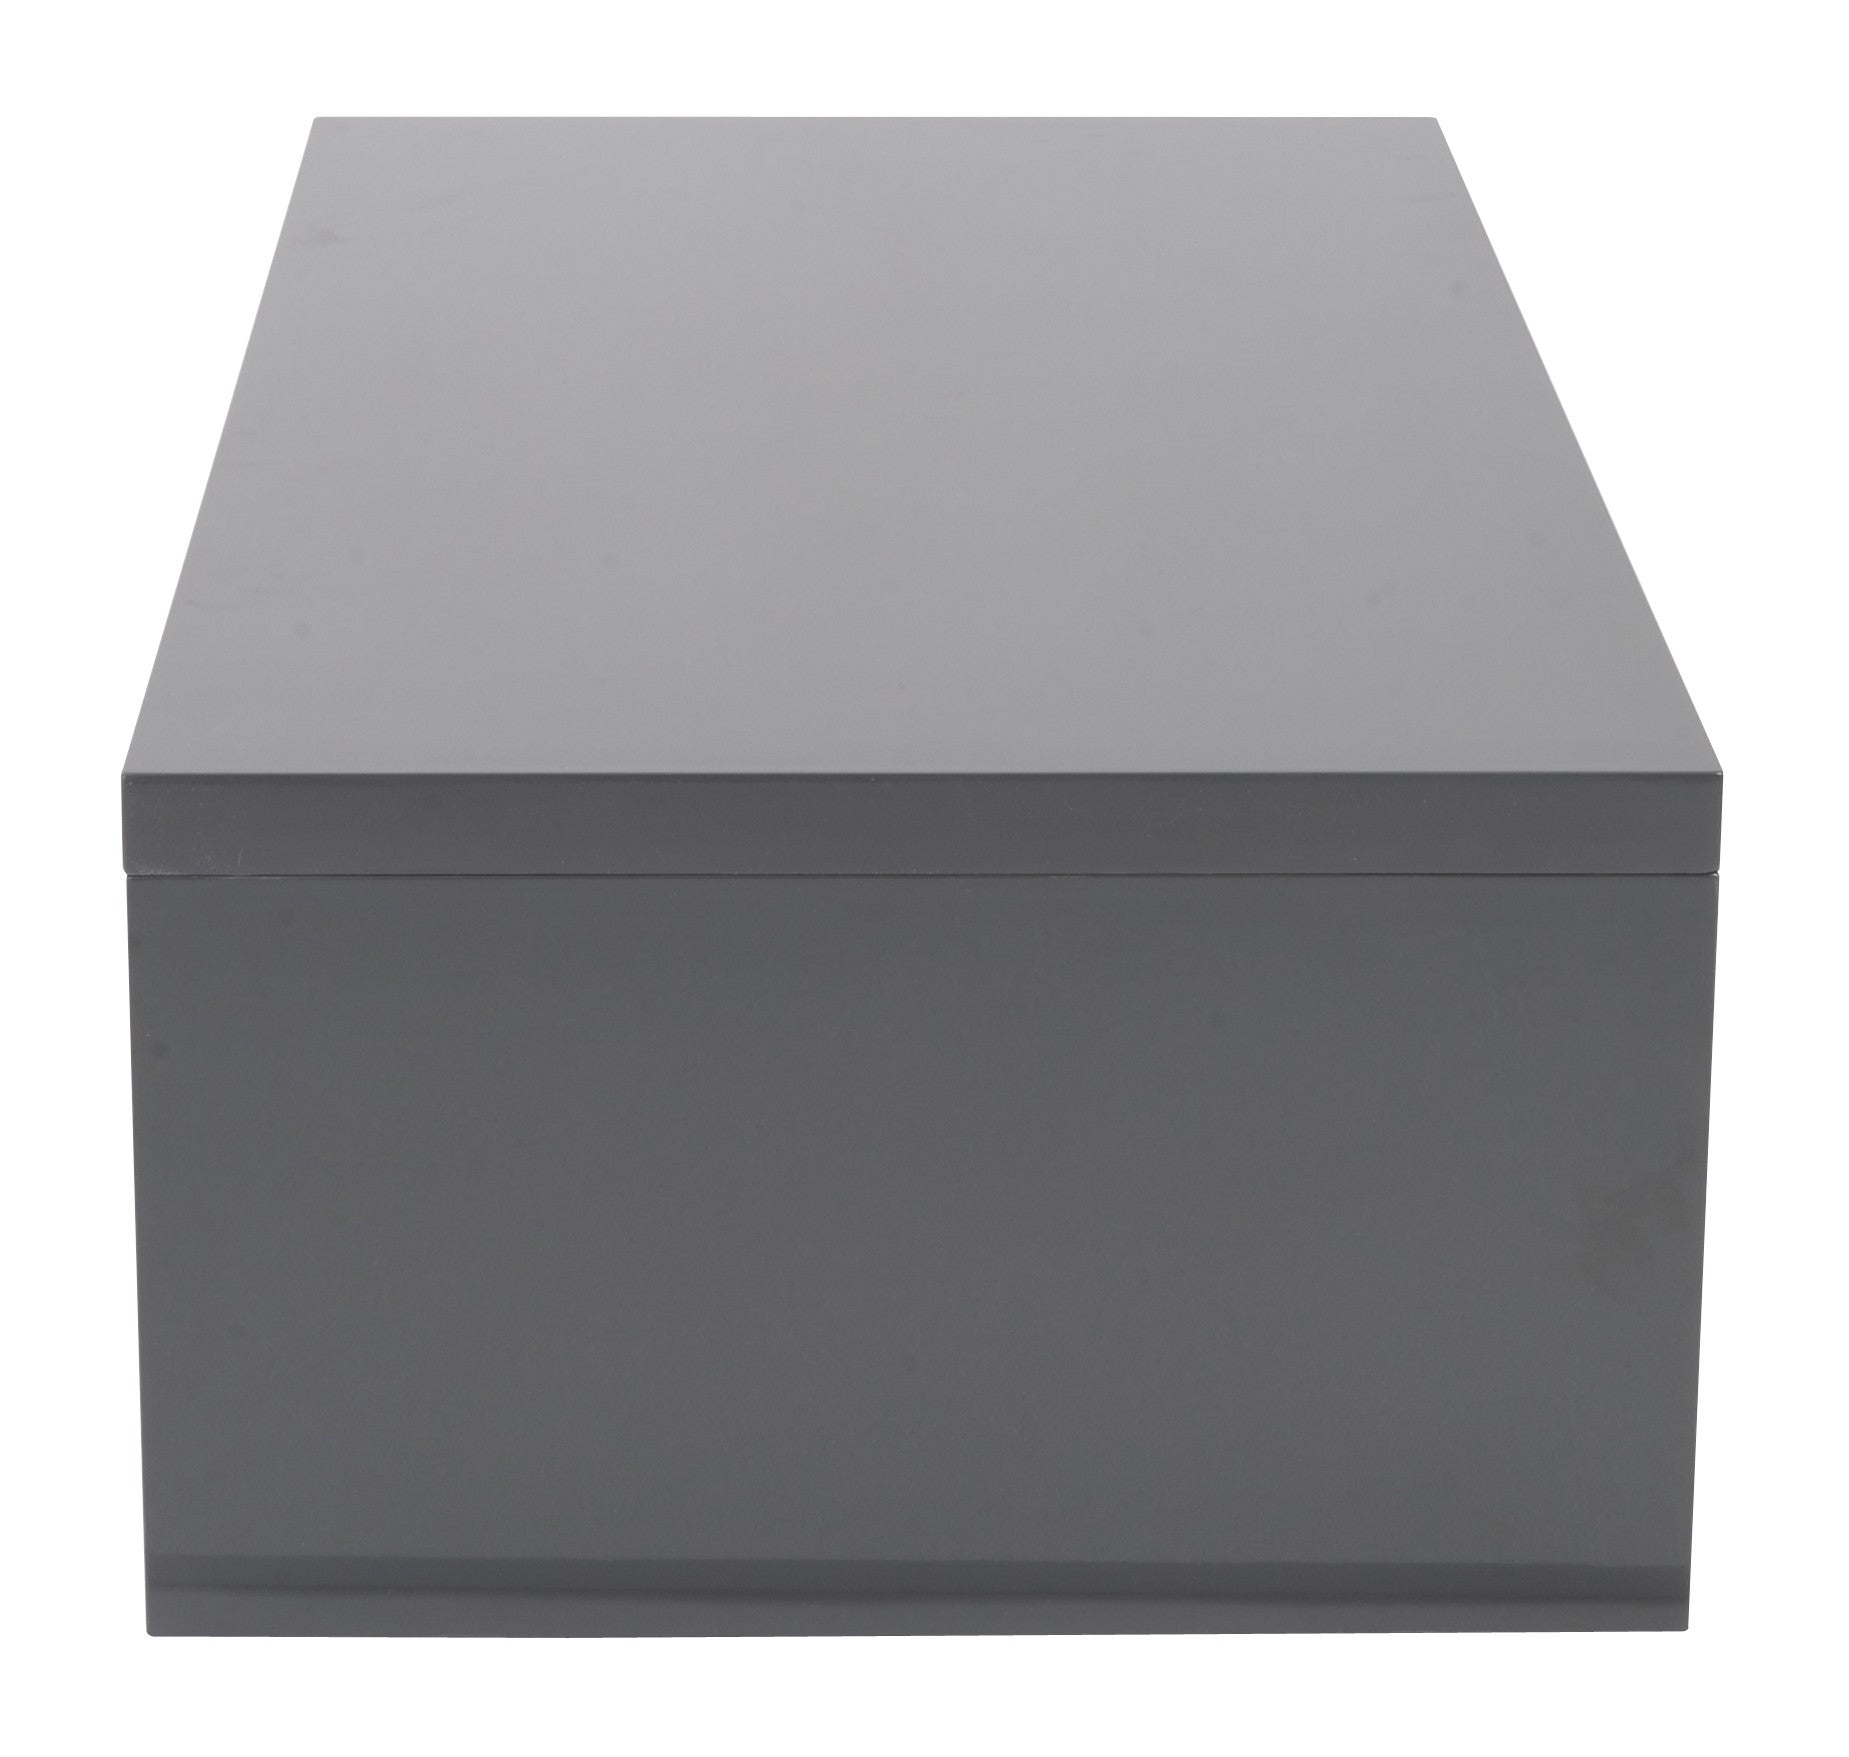 Able Coffee Table Gray Lacquer